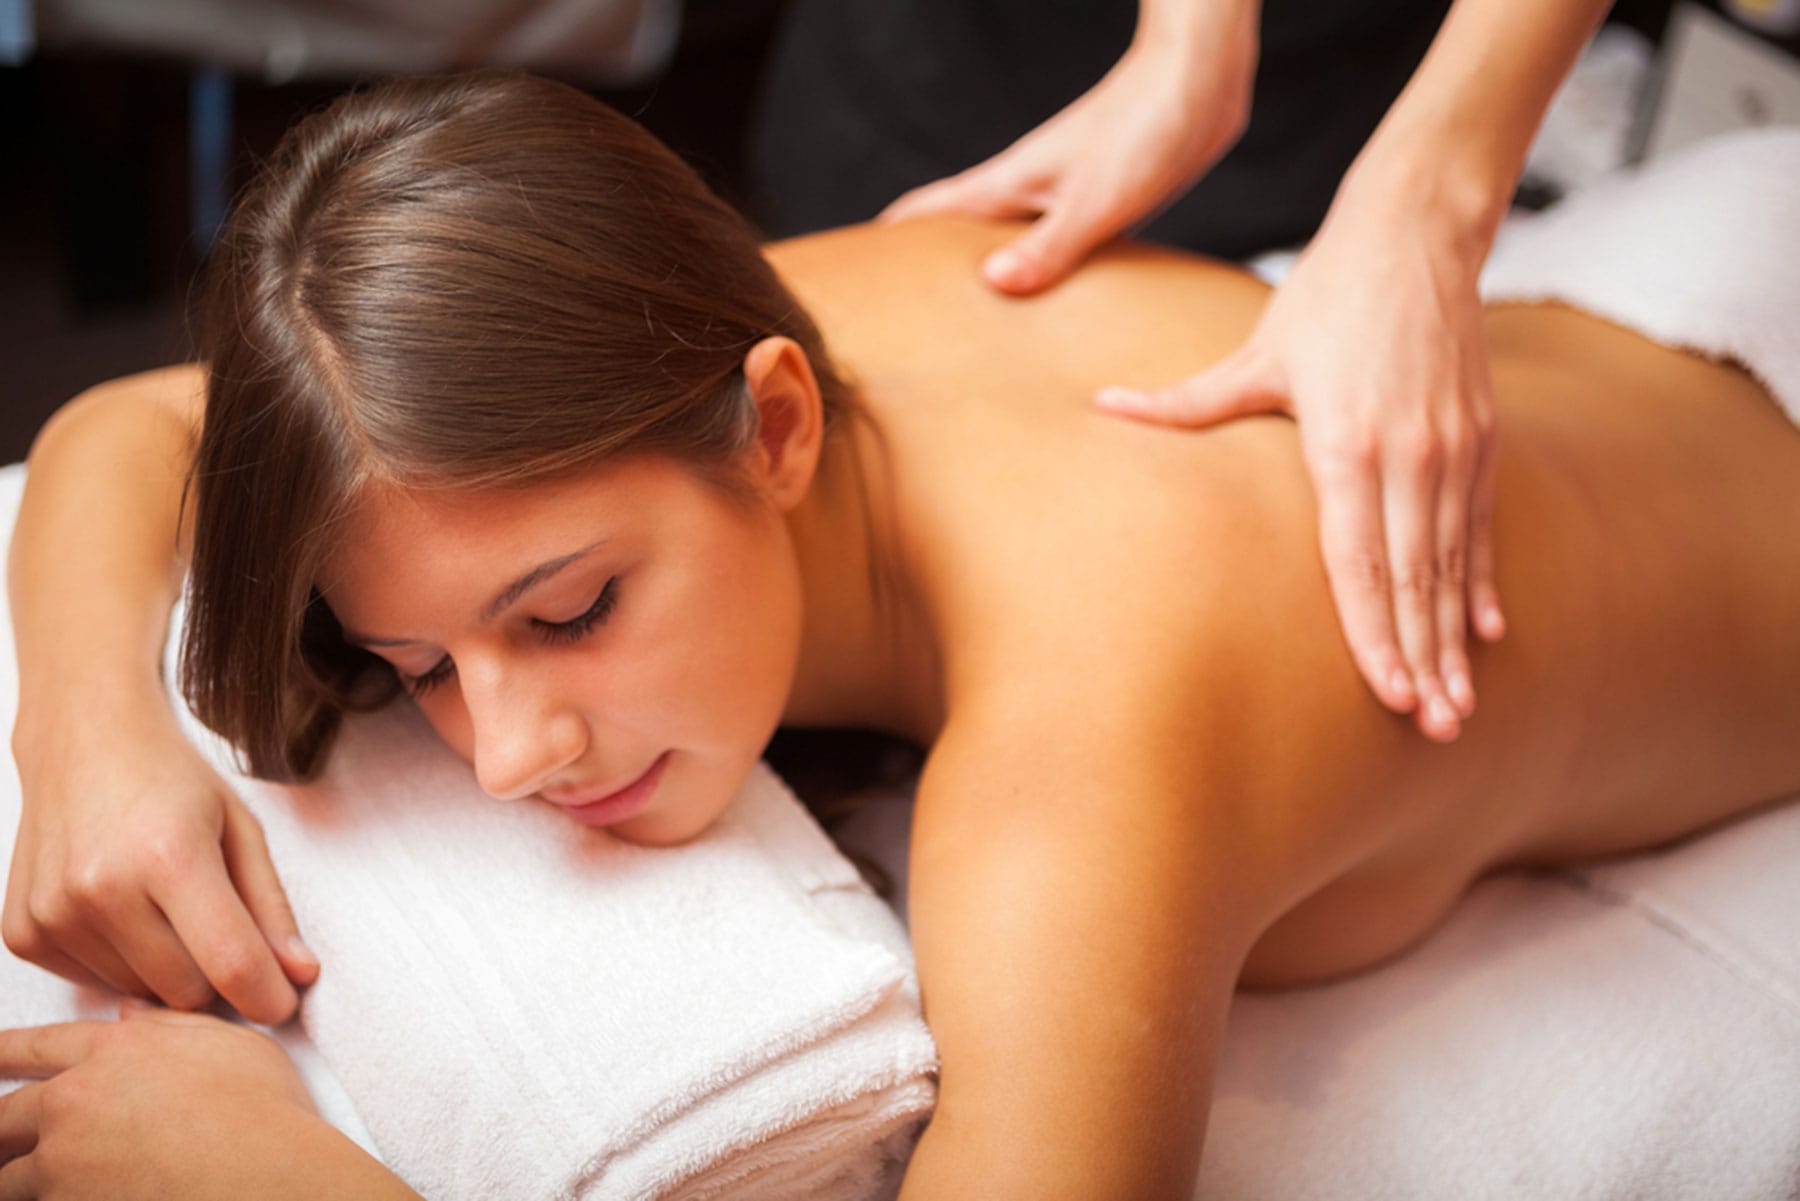 A person receiving a back massage while lying on a white towel with eyes closed